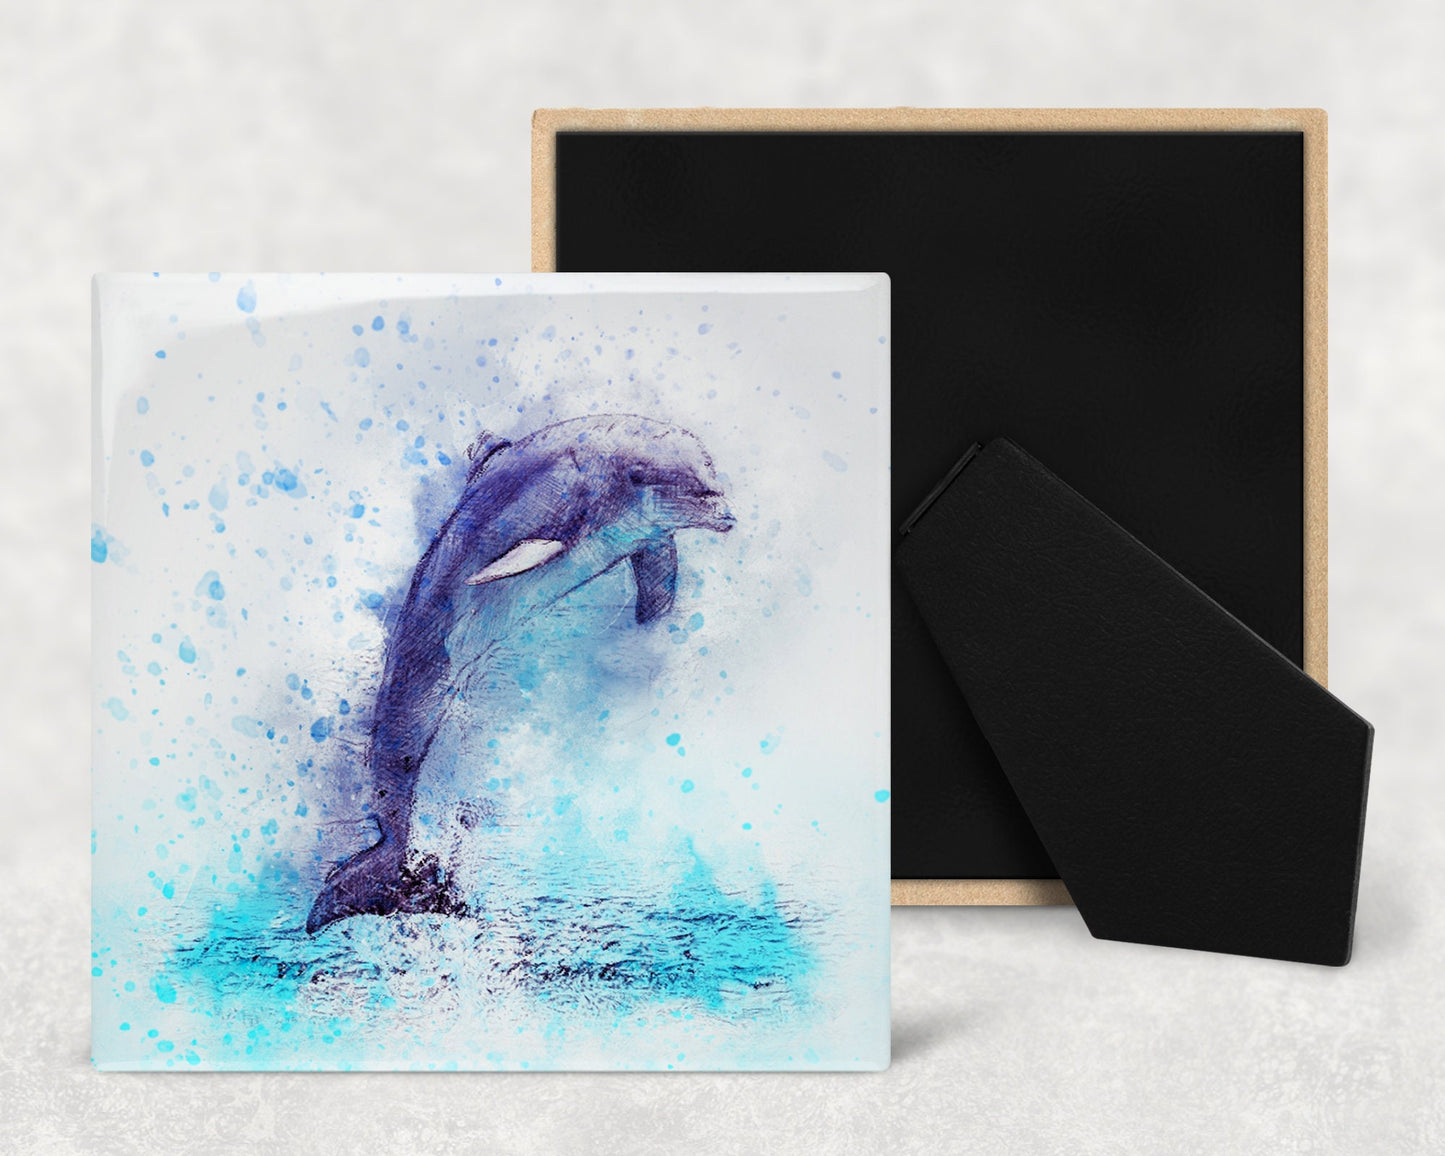 Watercolor Dolphin Art Decorative Ceramic Tile with Optional Easel Back - Available in 3 Sizes